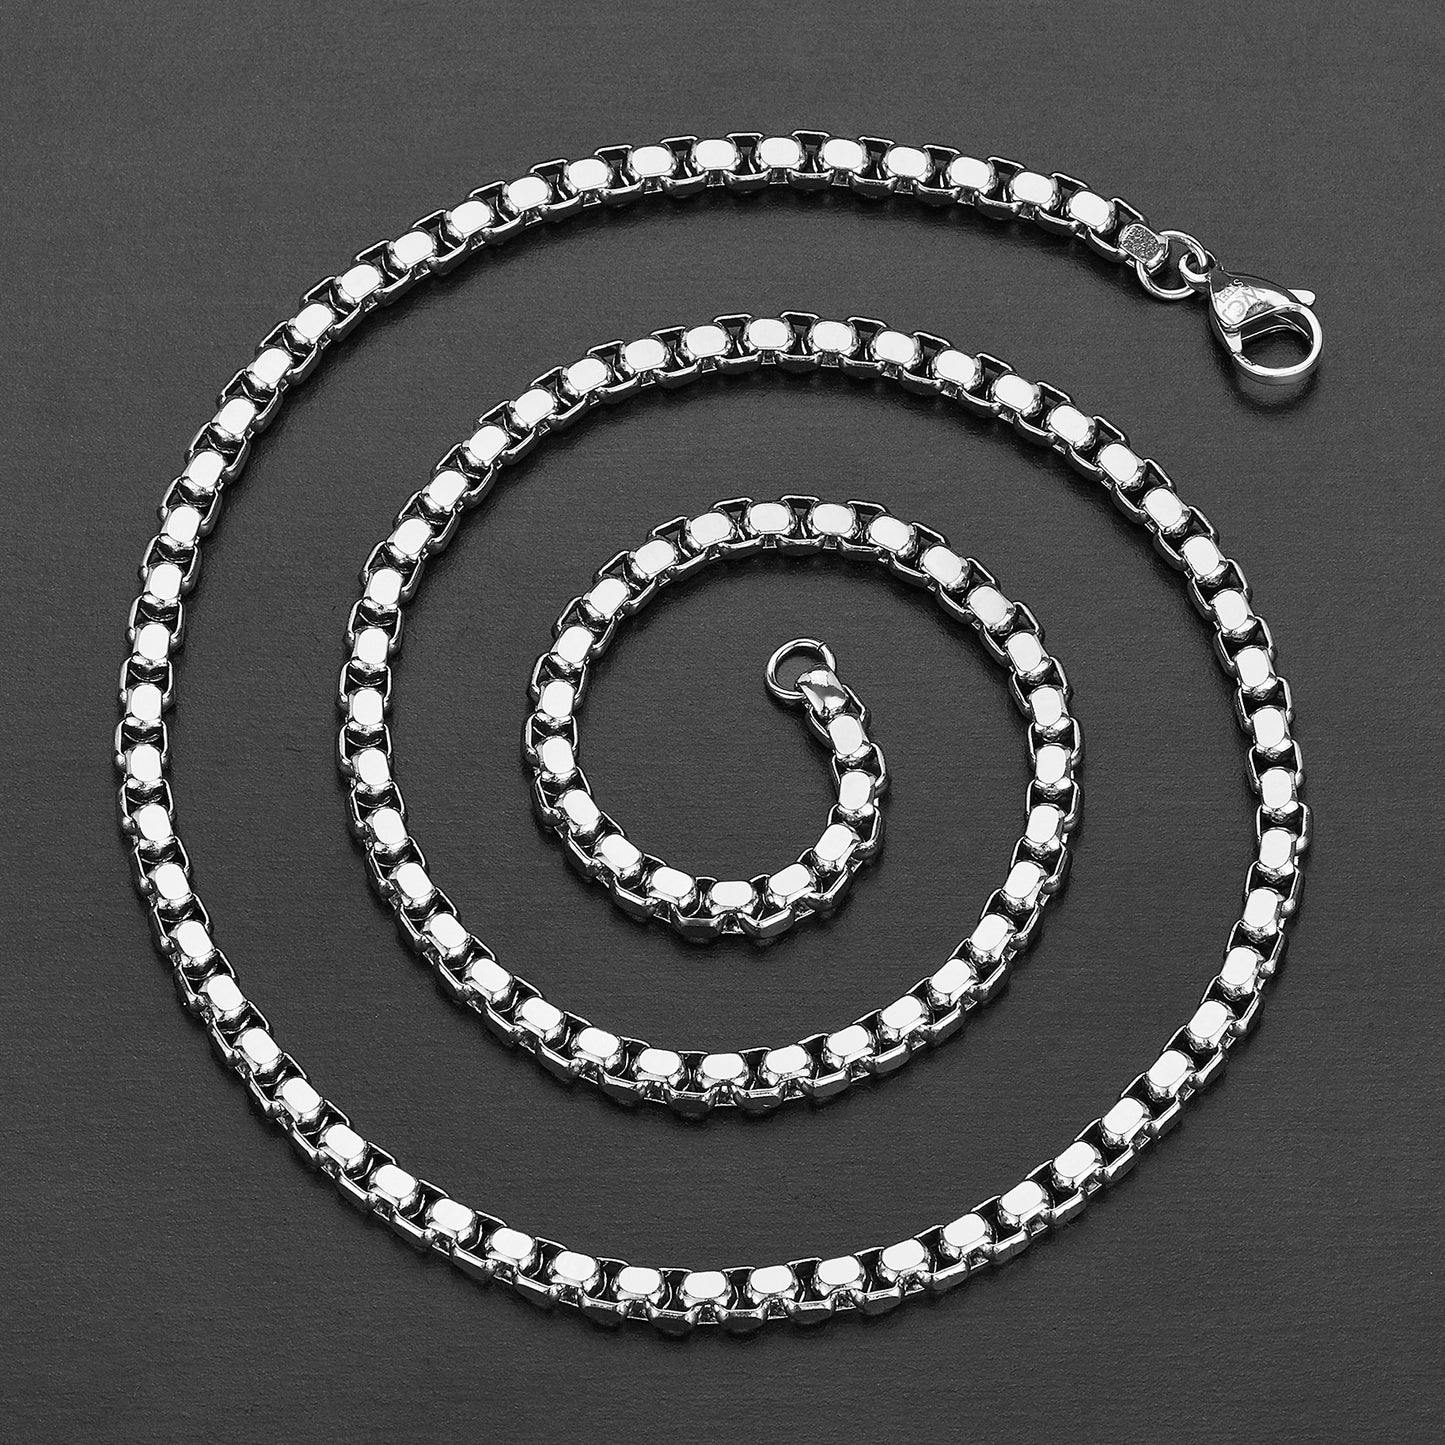 Men's Polished Box Chain Stainless Steel Necklace (5mm) - 24"